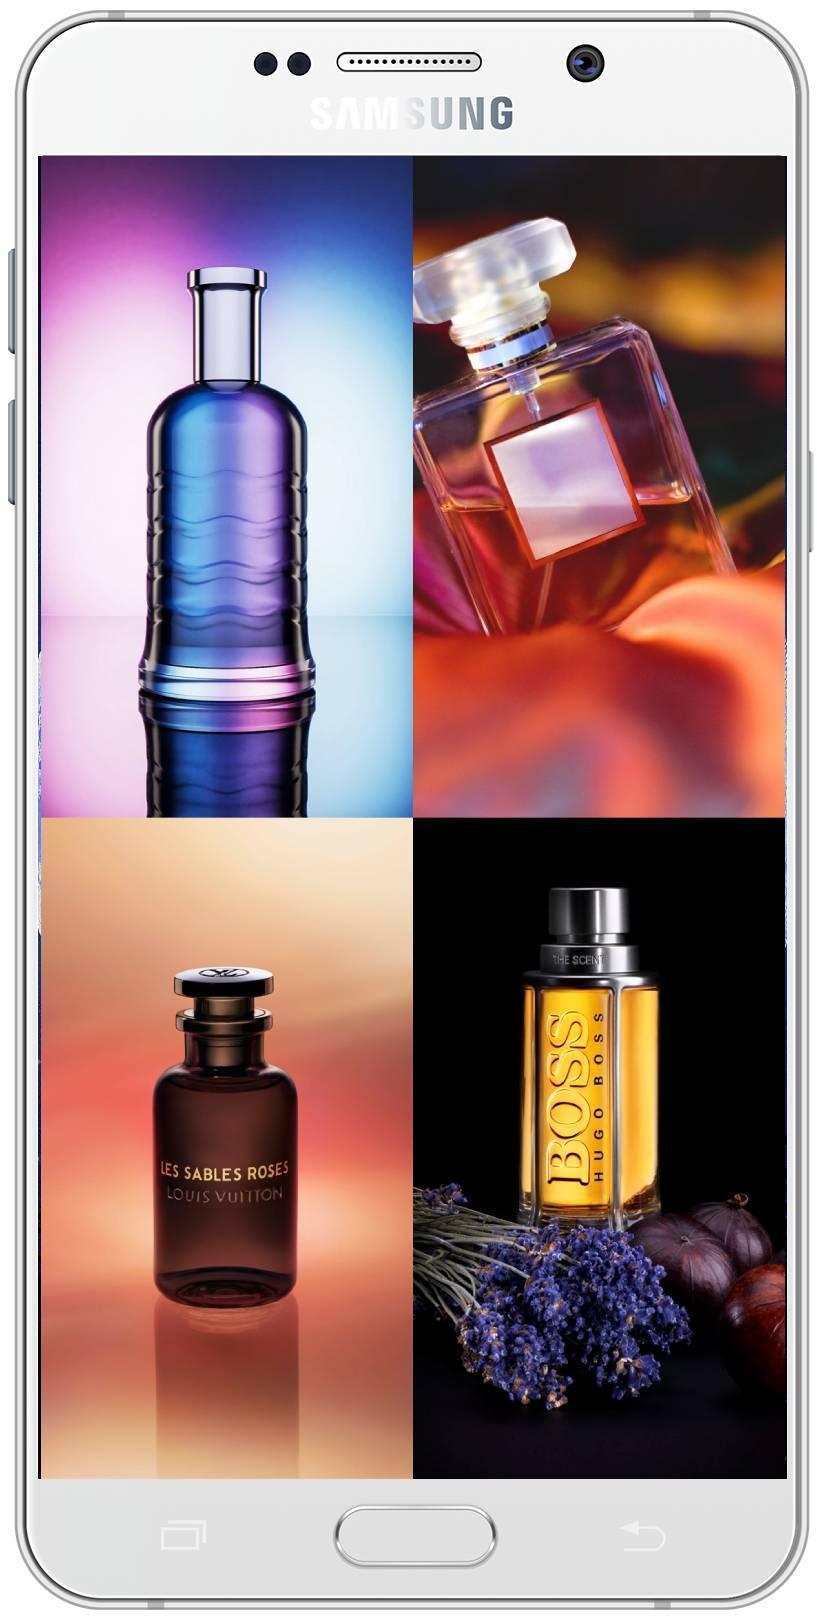 Perfume Wallpaper Hd For Android Apk Download